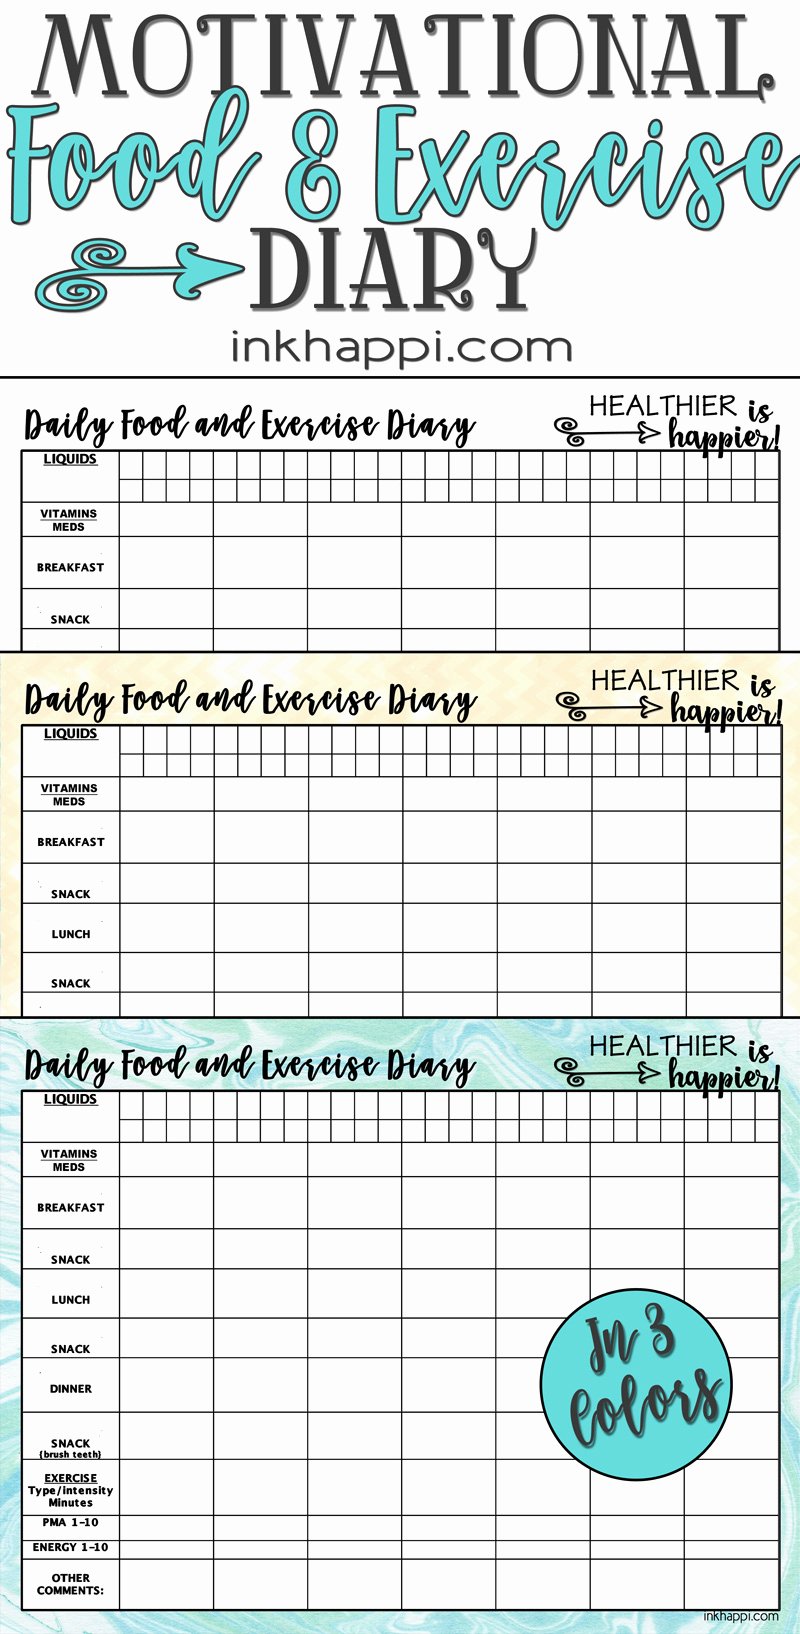 Weekly Food Diary Template New Motivational Food and Exercise Diary Free Printable